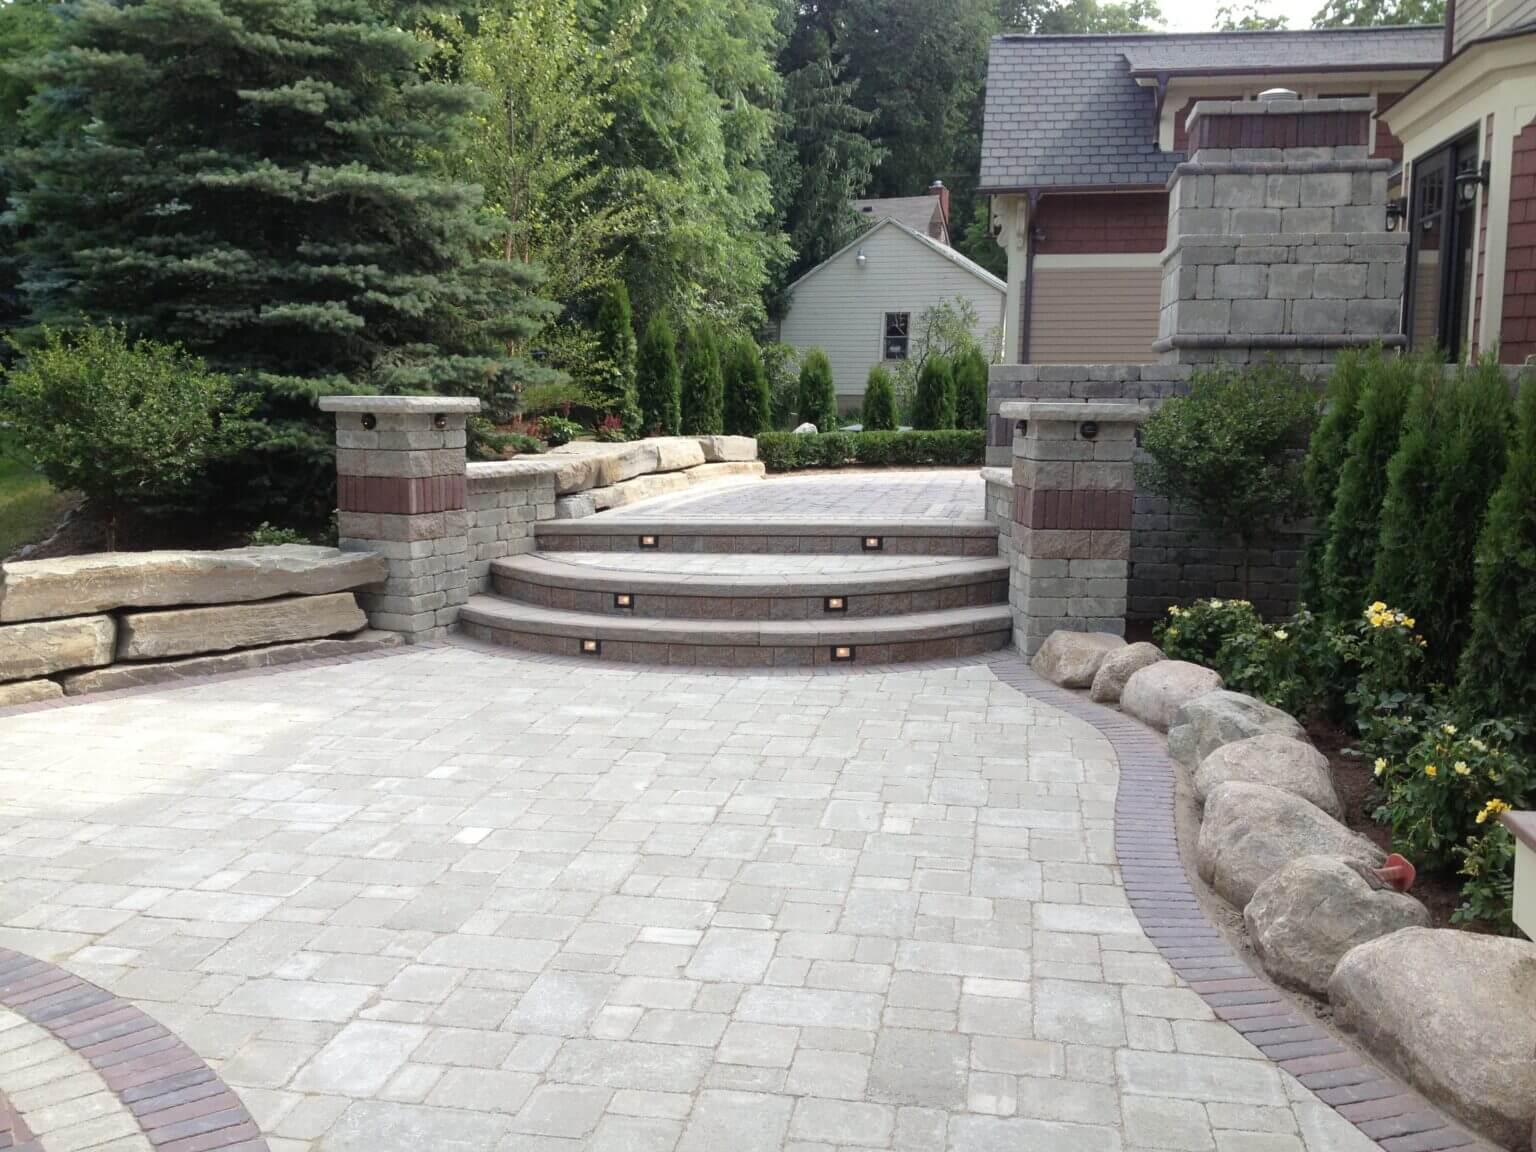 Patio designs detroit mi Patio company Northville landscaping Front yard paving stones in Michigan Front yard hardscape design Michigan Michigan front yard patio pavers Front yard walkway pavers Michigan Front yard paver installation in Michigan Michigan front yard brick pavers Front yard driveway pavers Michigan Michigan front yard paver contractors Front yard paving ideas in Michigan Michigan front yard outdoor living with pavers Front yard landscape design using pavers in Michigan Michigan front yard interlocking pavers Front yard paver repair Michigan Michigan front yard paving cost Front yard paver maintenance in Michigan Michigan front yard retaining wall with pavers Front yard fire pit with pavers Michigan